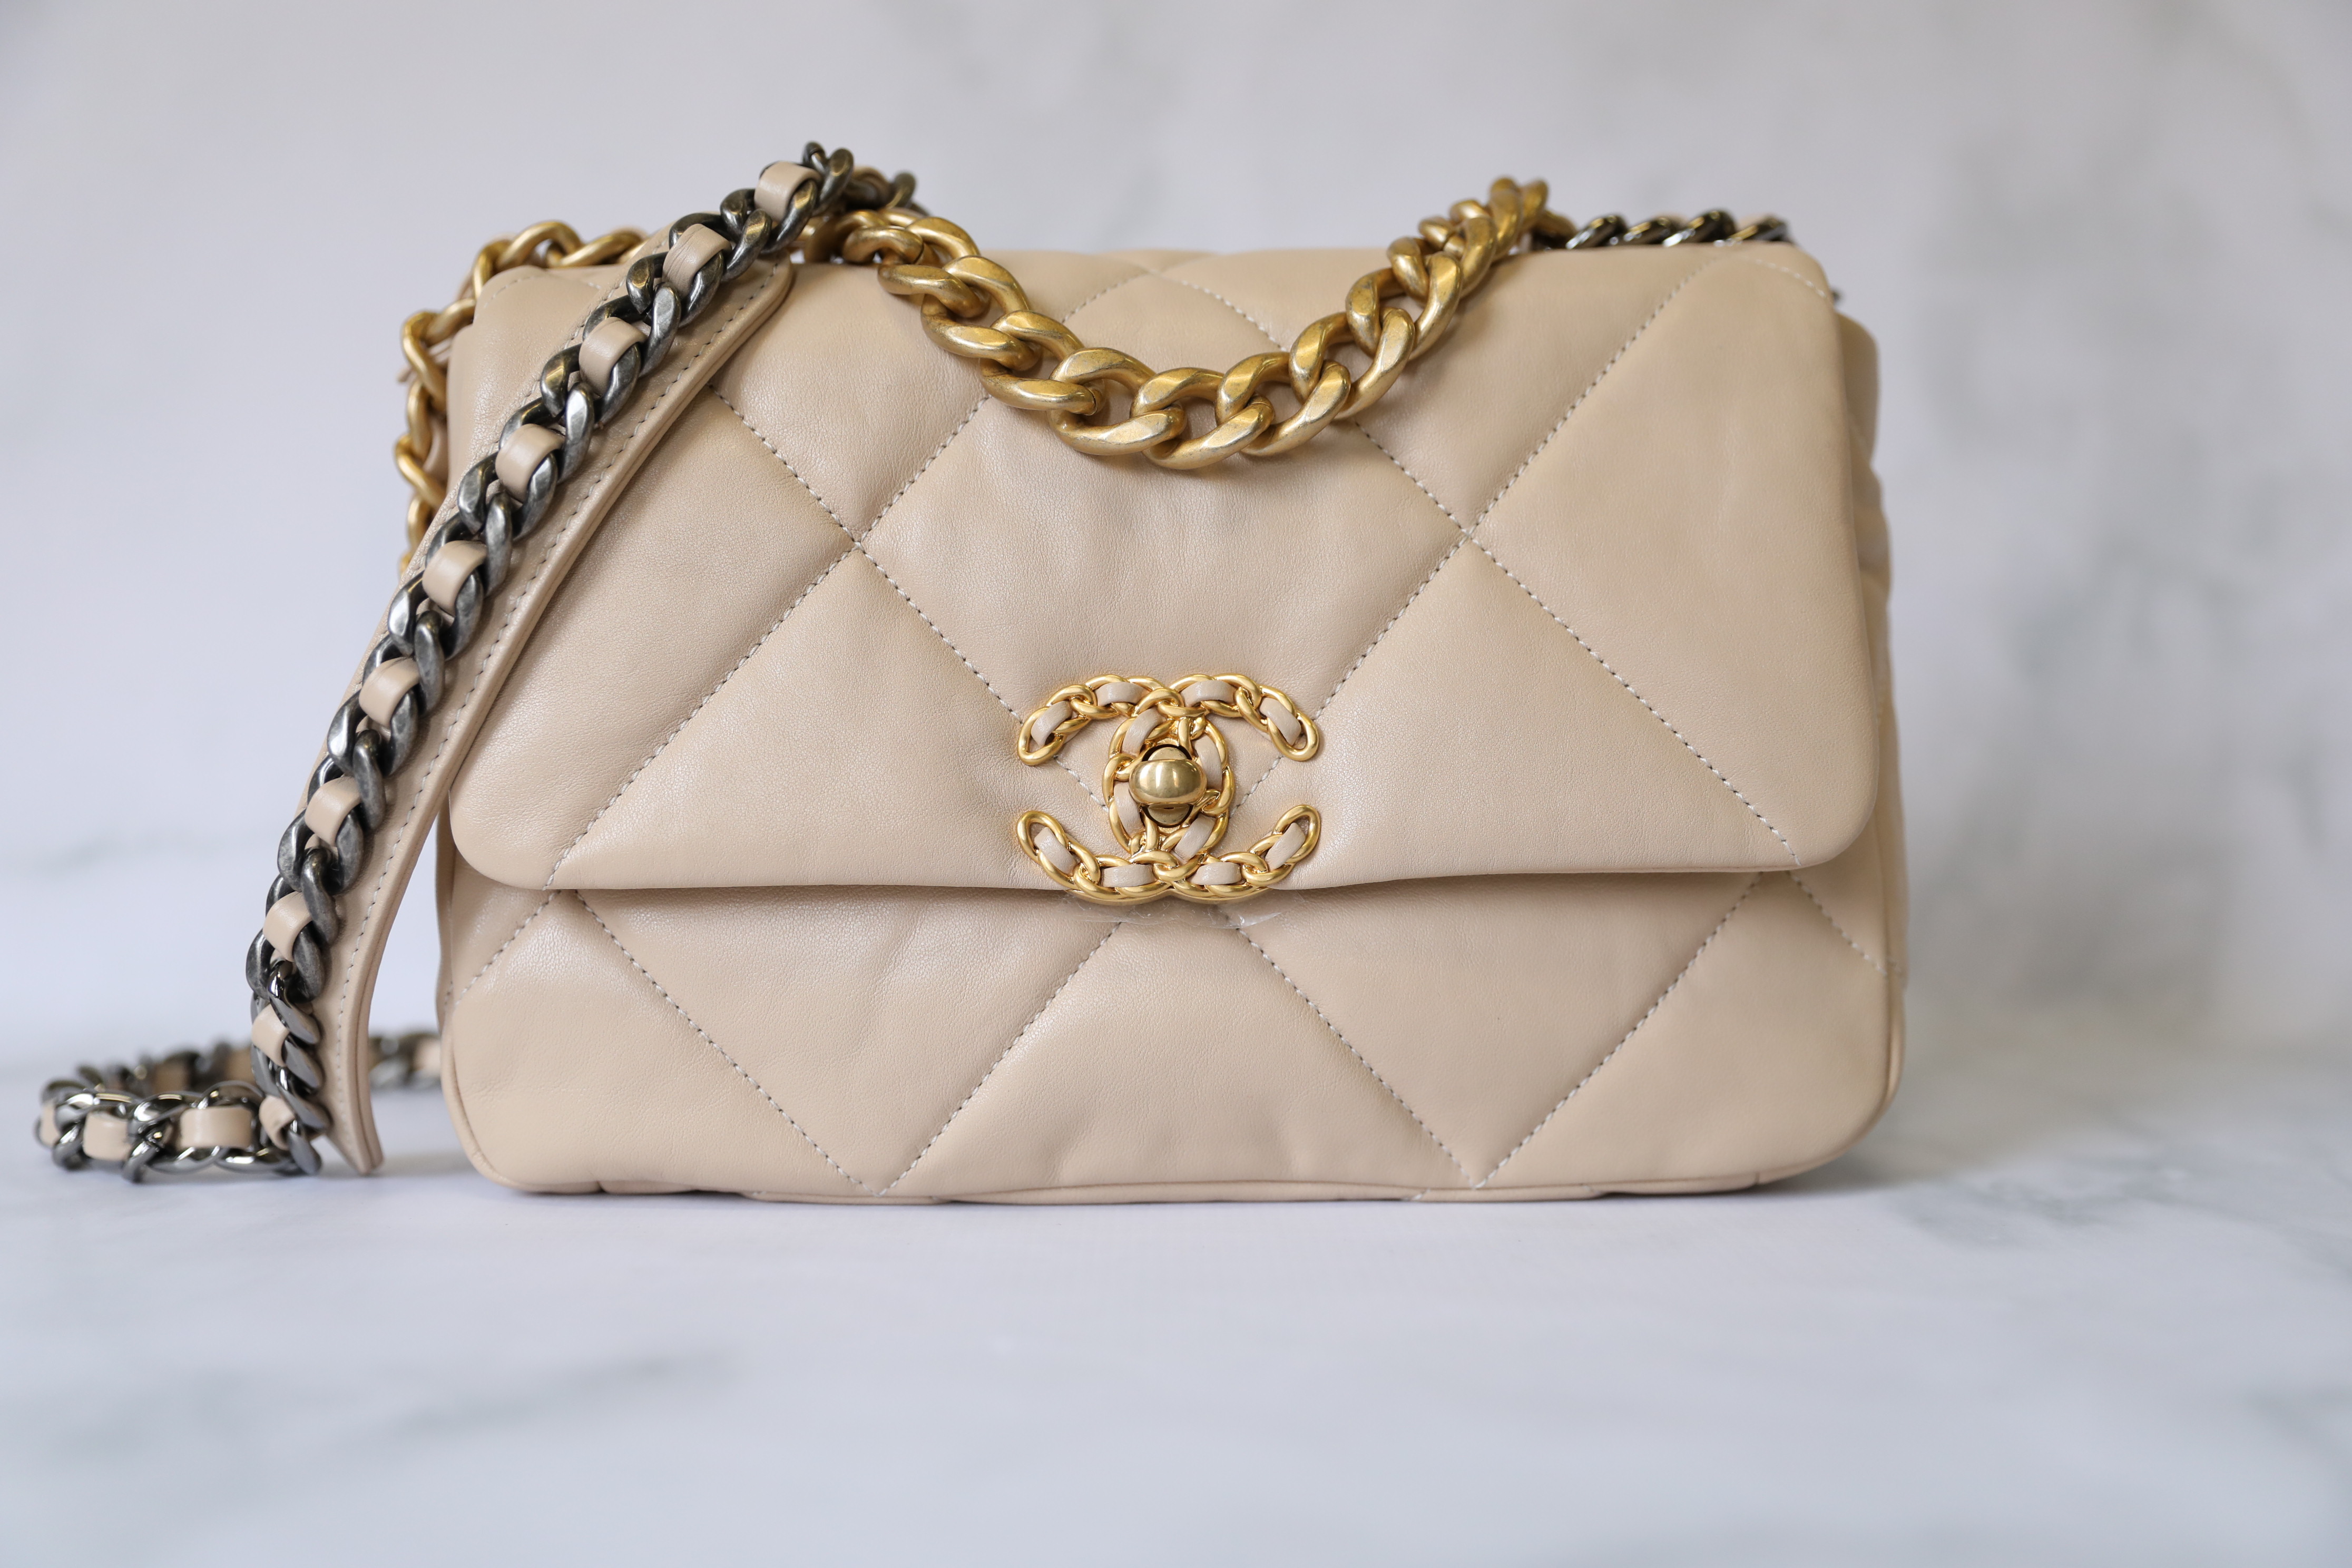 Chanel 19 Classic Light Beige with Gold Hardware 20S, As New in